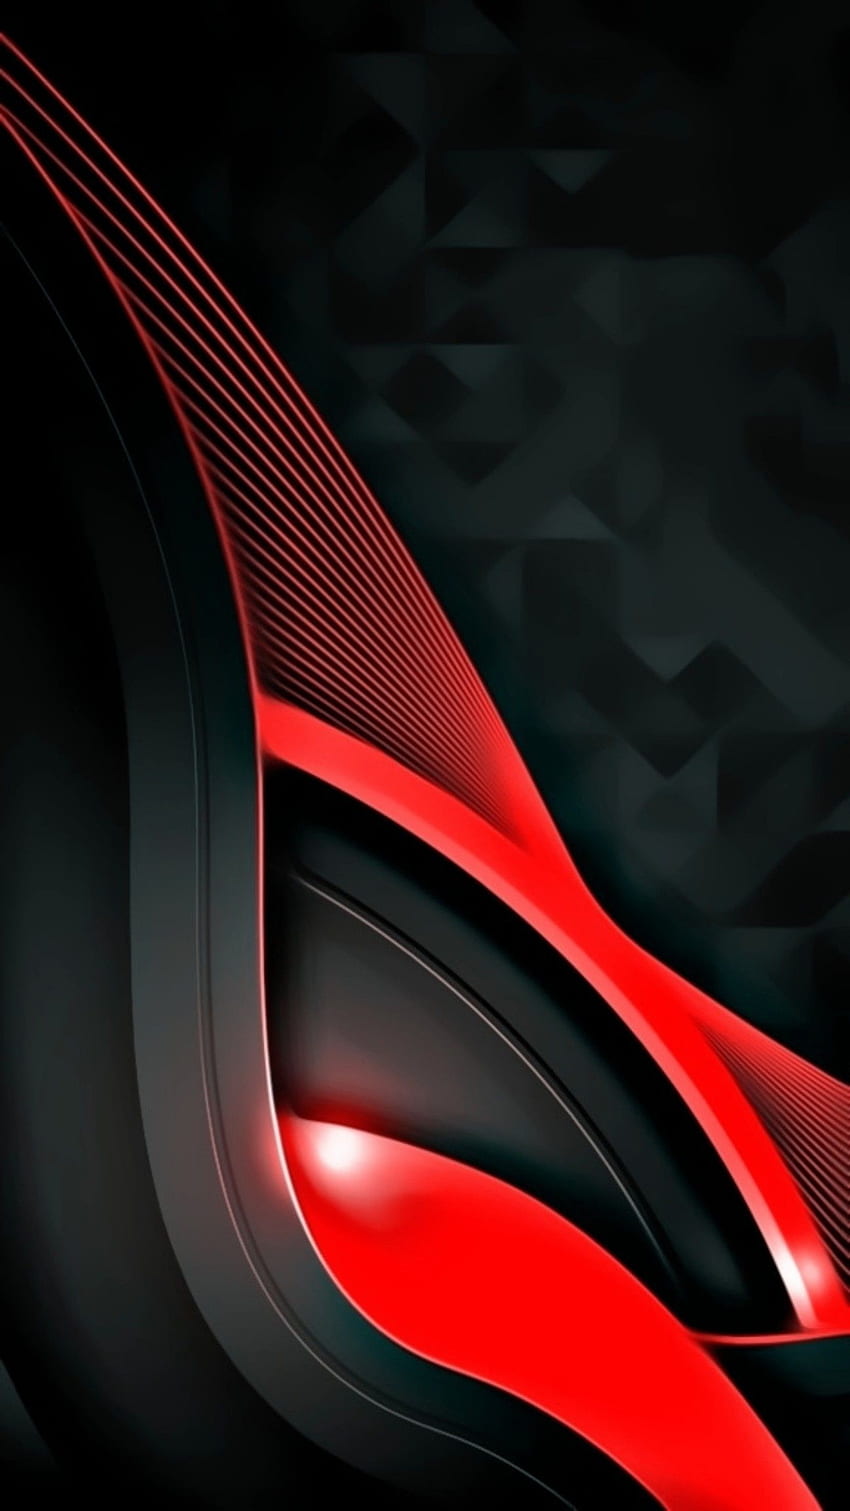 material design amoled, red, curves, neon, black, layers, pattern, luxury, shiny, abstract, tint HD phone wallpaper